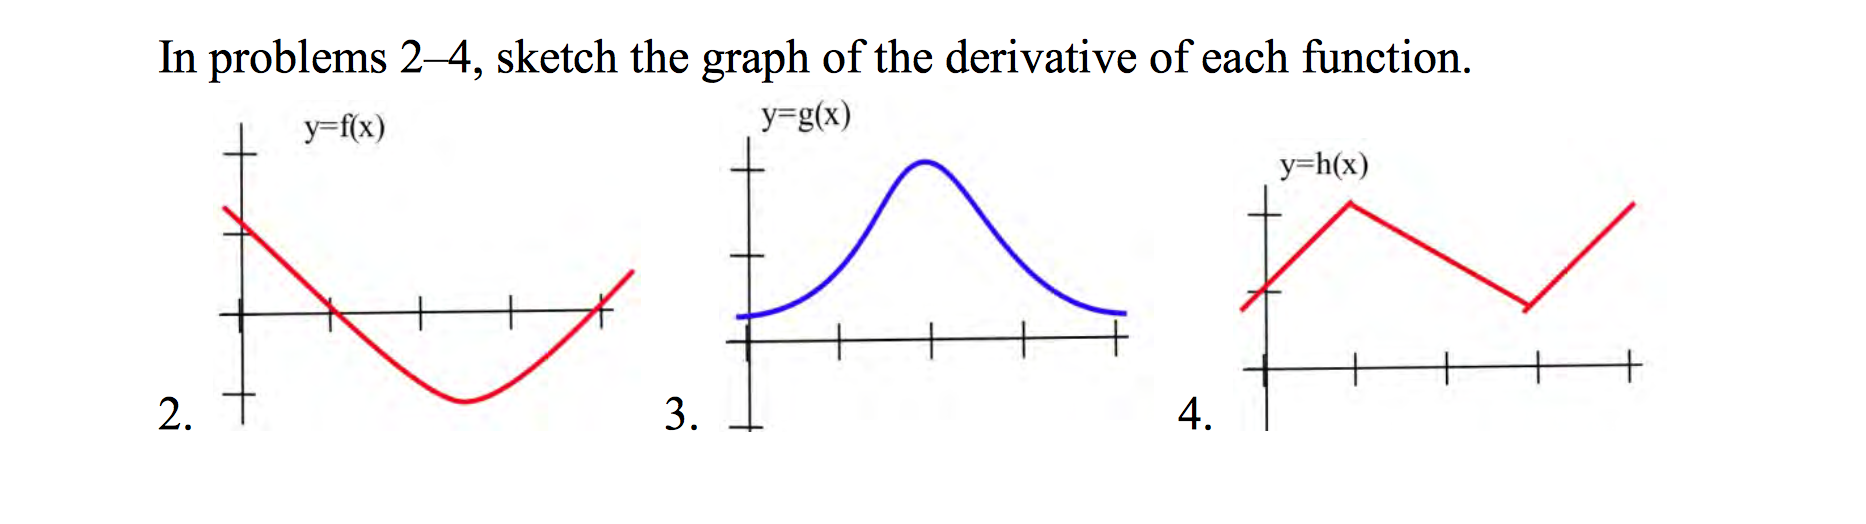 solved-in-problems-2-4-sketch-the-graph-of-the-derivative-chegg